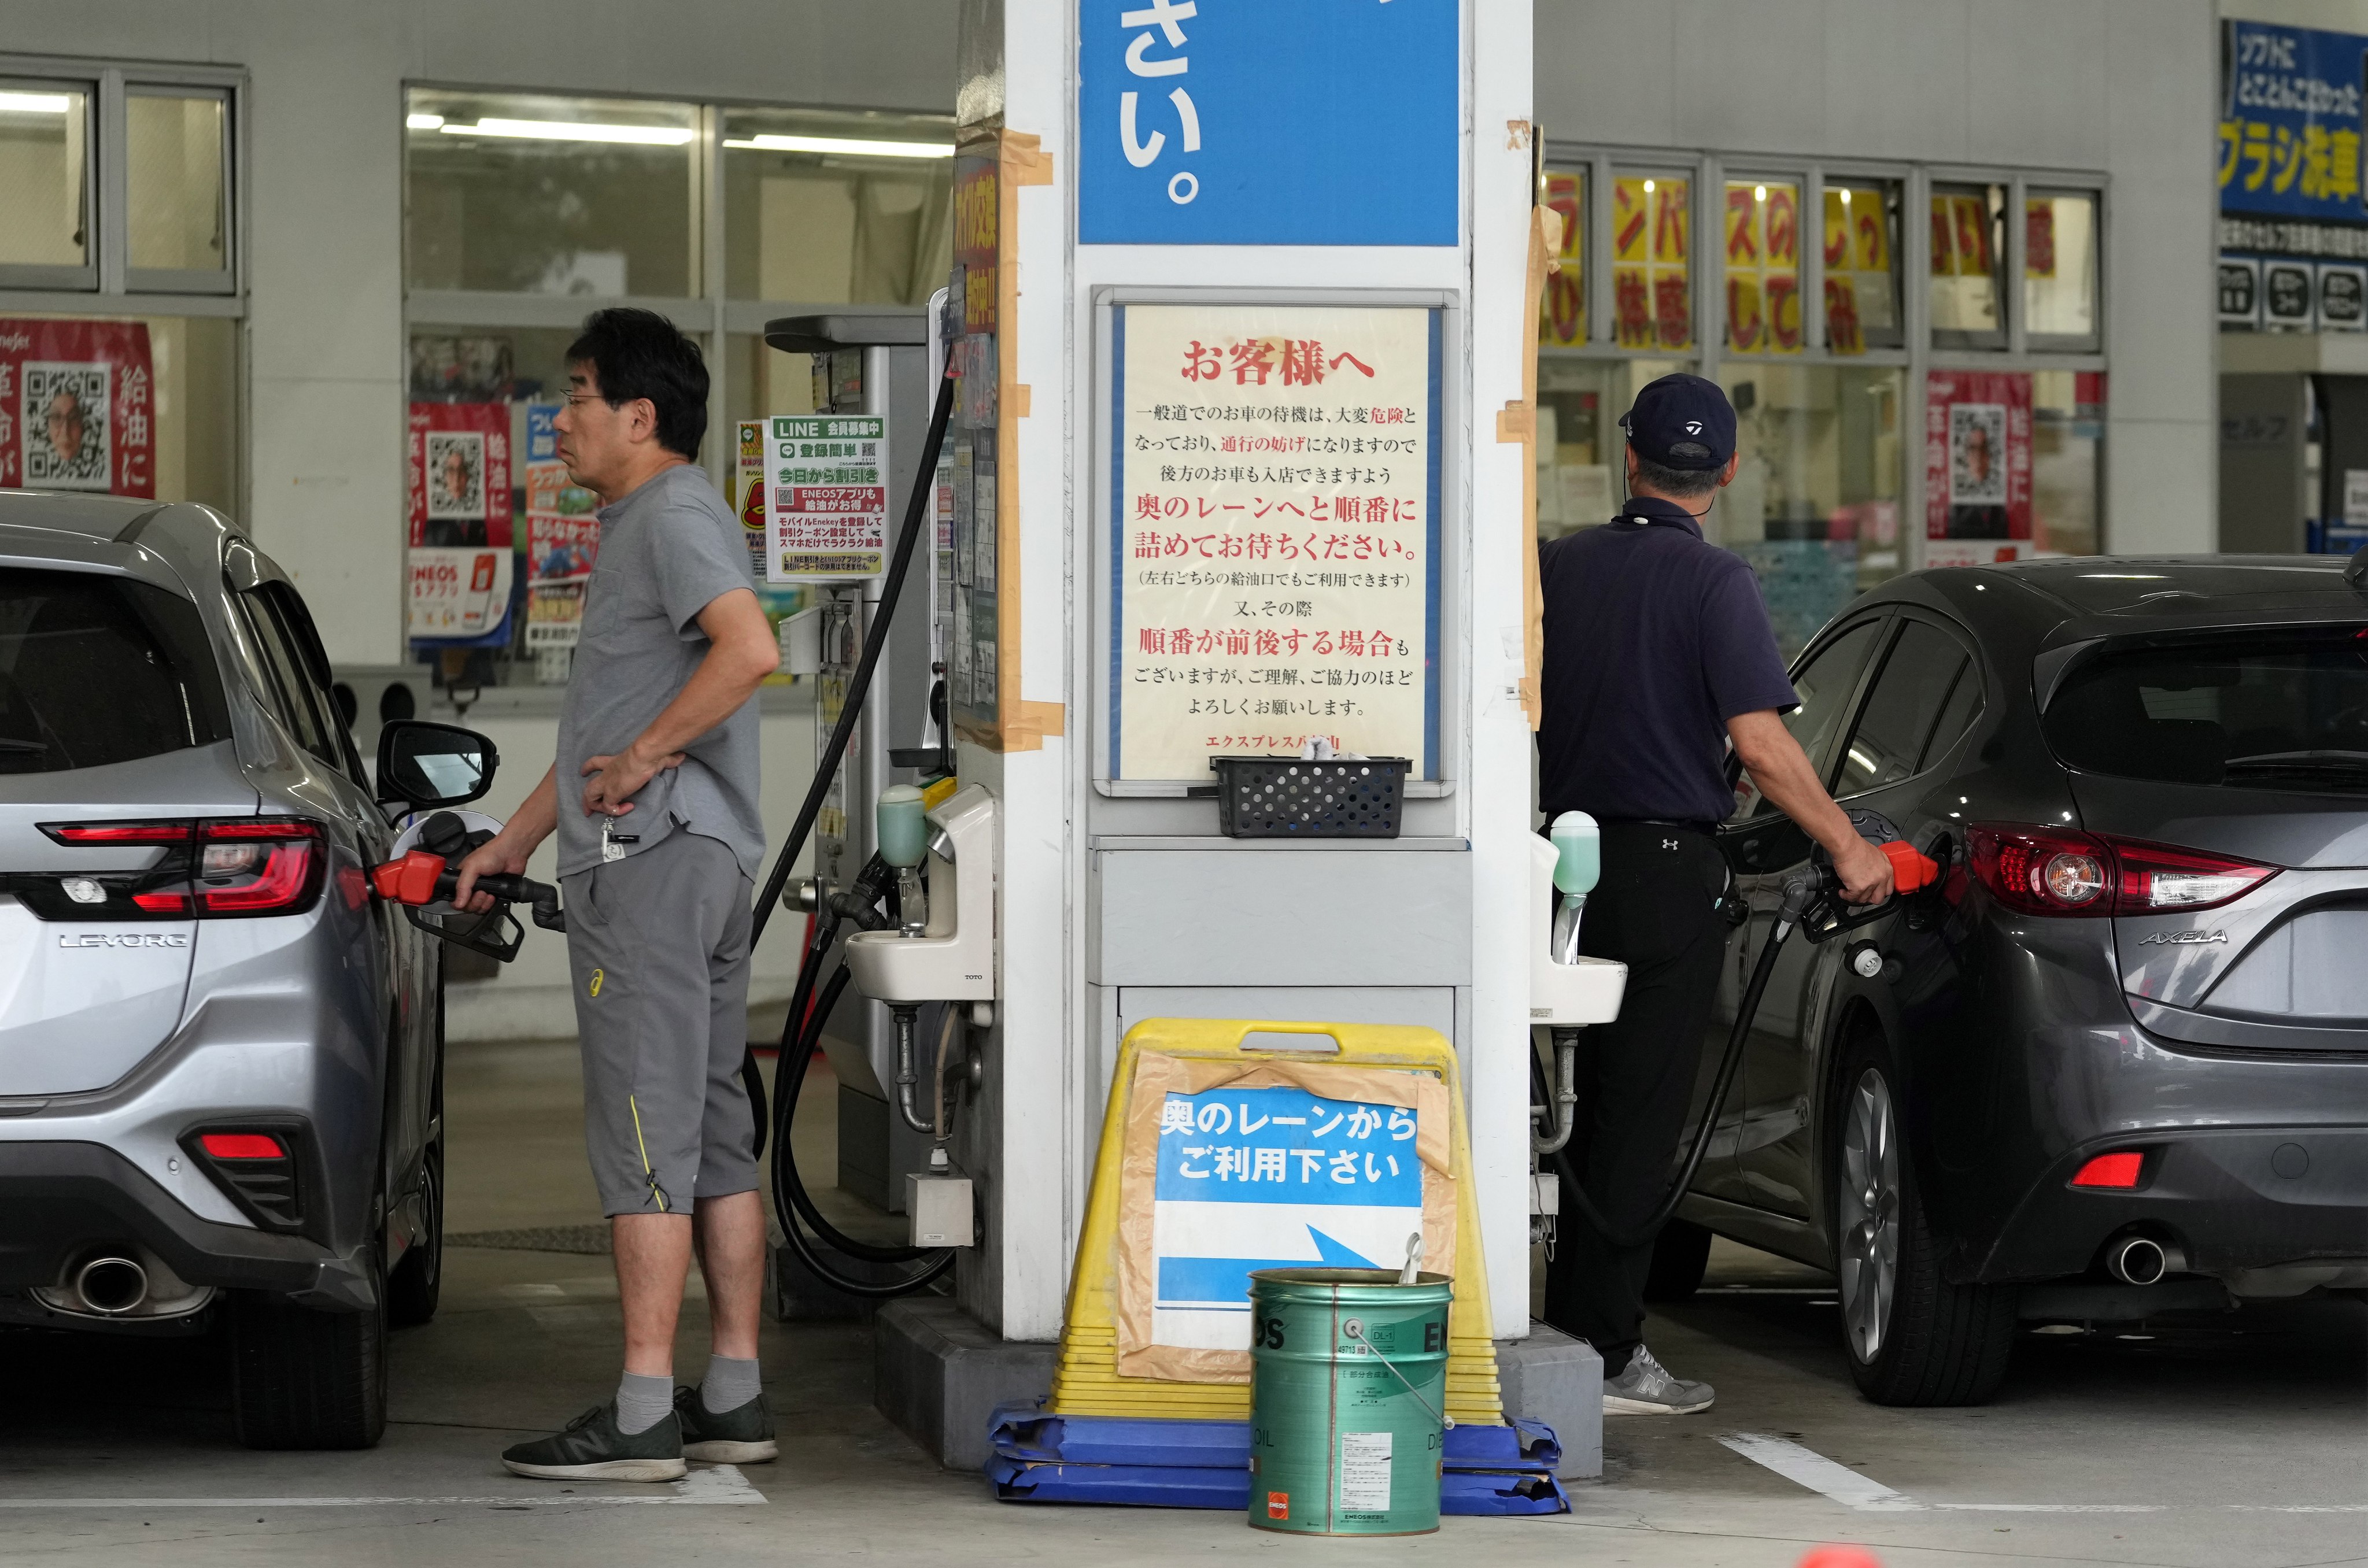 Drivers fuel their cars at a petrol station in Tokyo on September 22. Japan has, for decades, suffered timid investment trends, sluggish income growth and a dearth of risk-taking. Photo: EPA-EFE